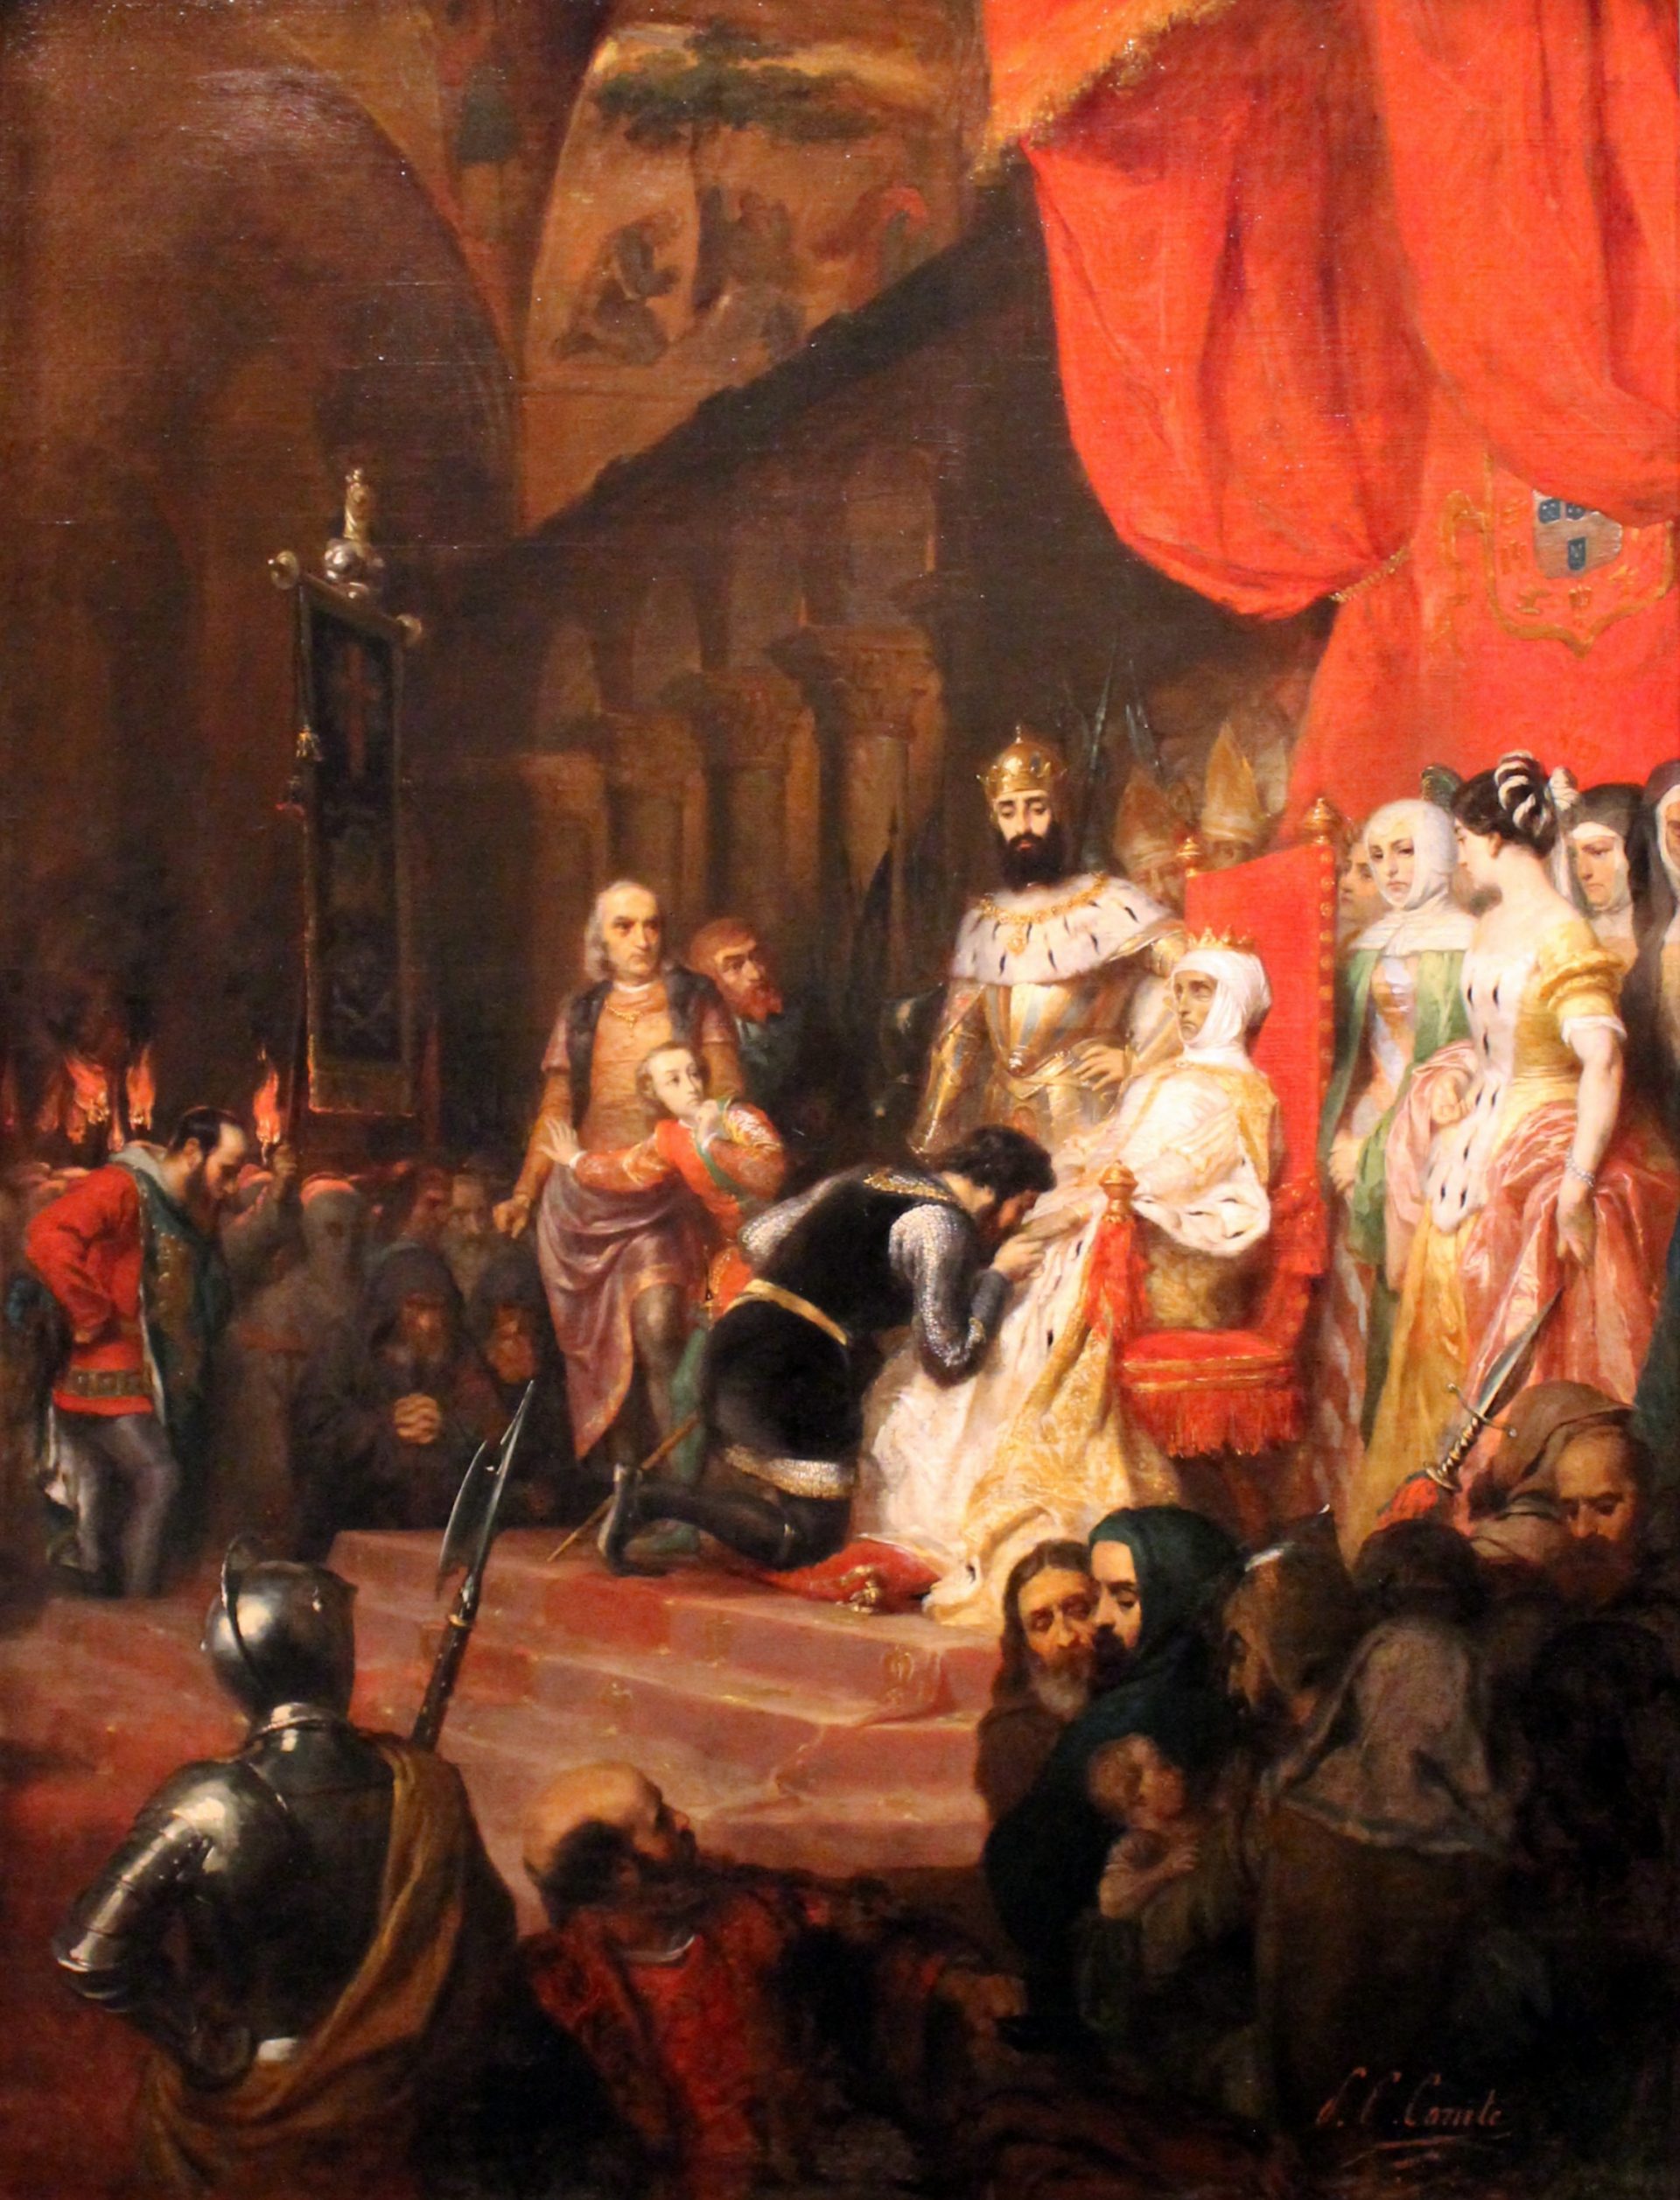 This painting depicts the coronation of the body of Inés de Castro. The painting shows a throne surrounded by a group of people. The throne is draped in red cloth and the body is adorned with gold and silver trimmings. A man is kneeling in front of the body on the throne and kissing its hand.